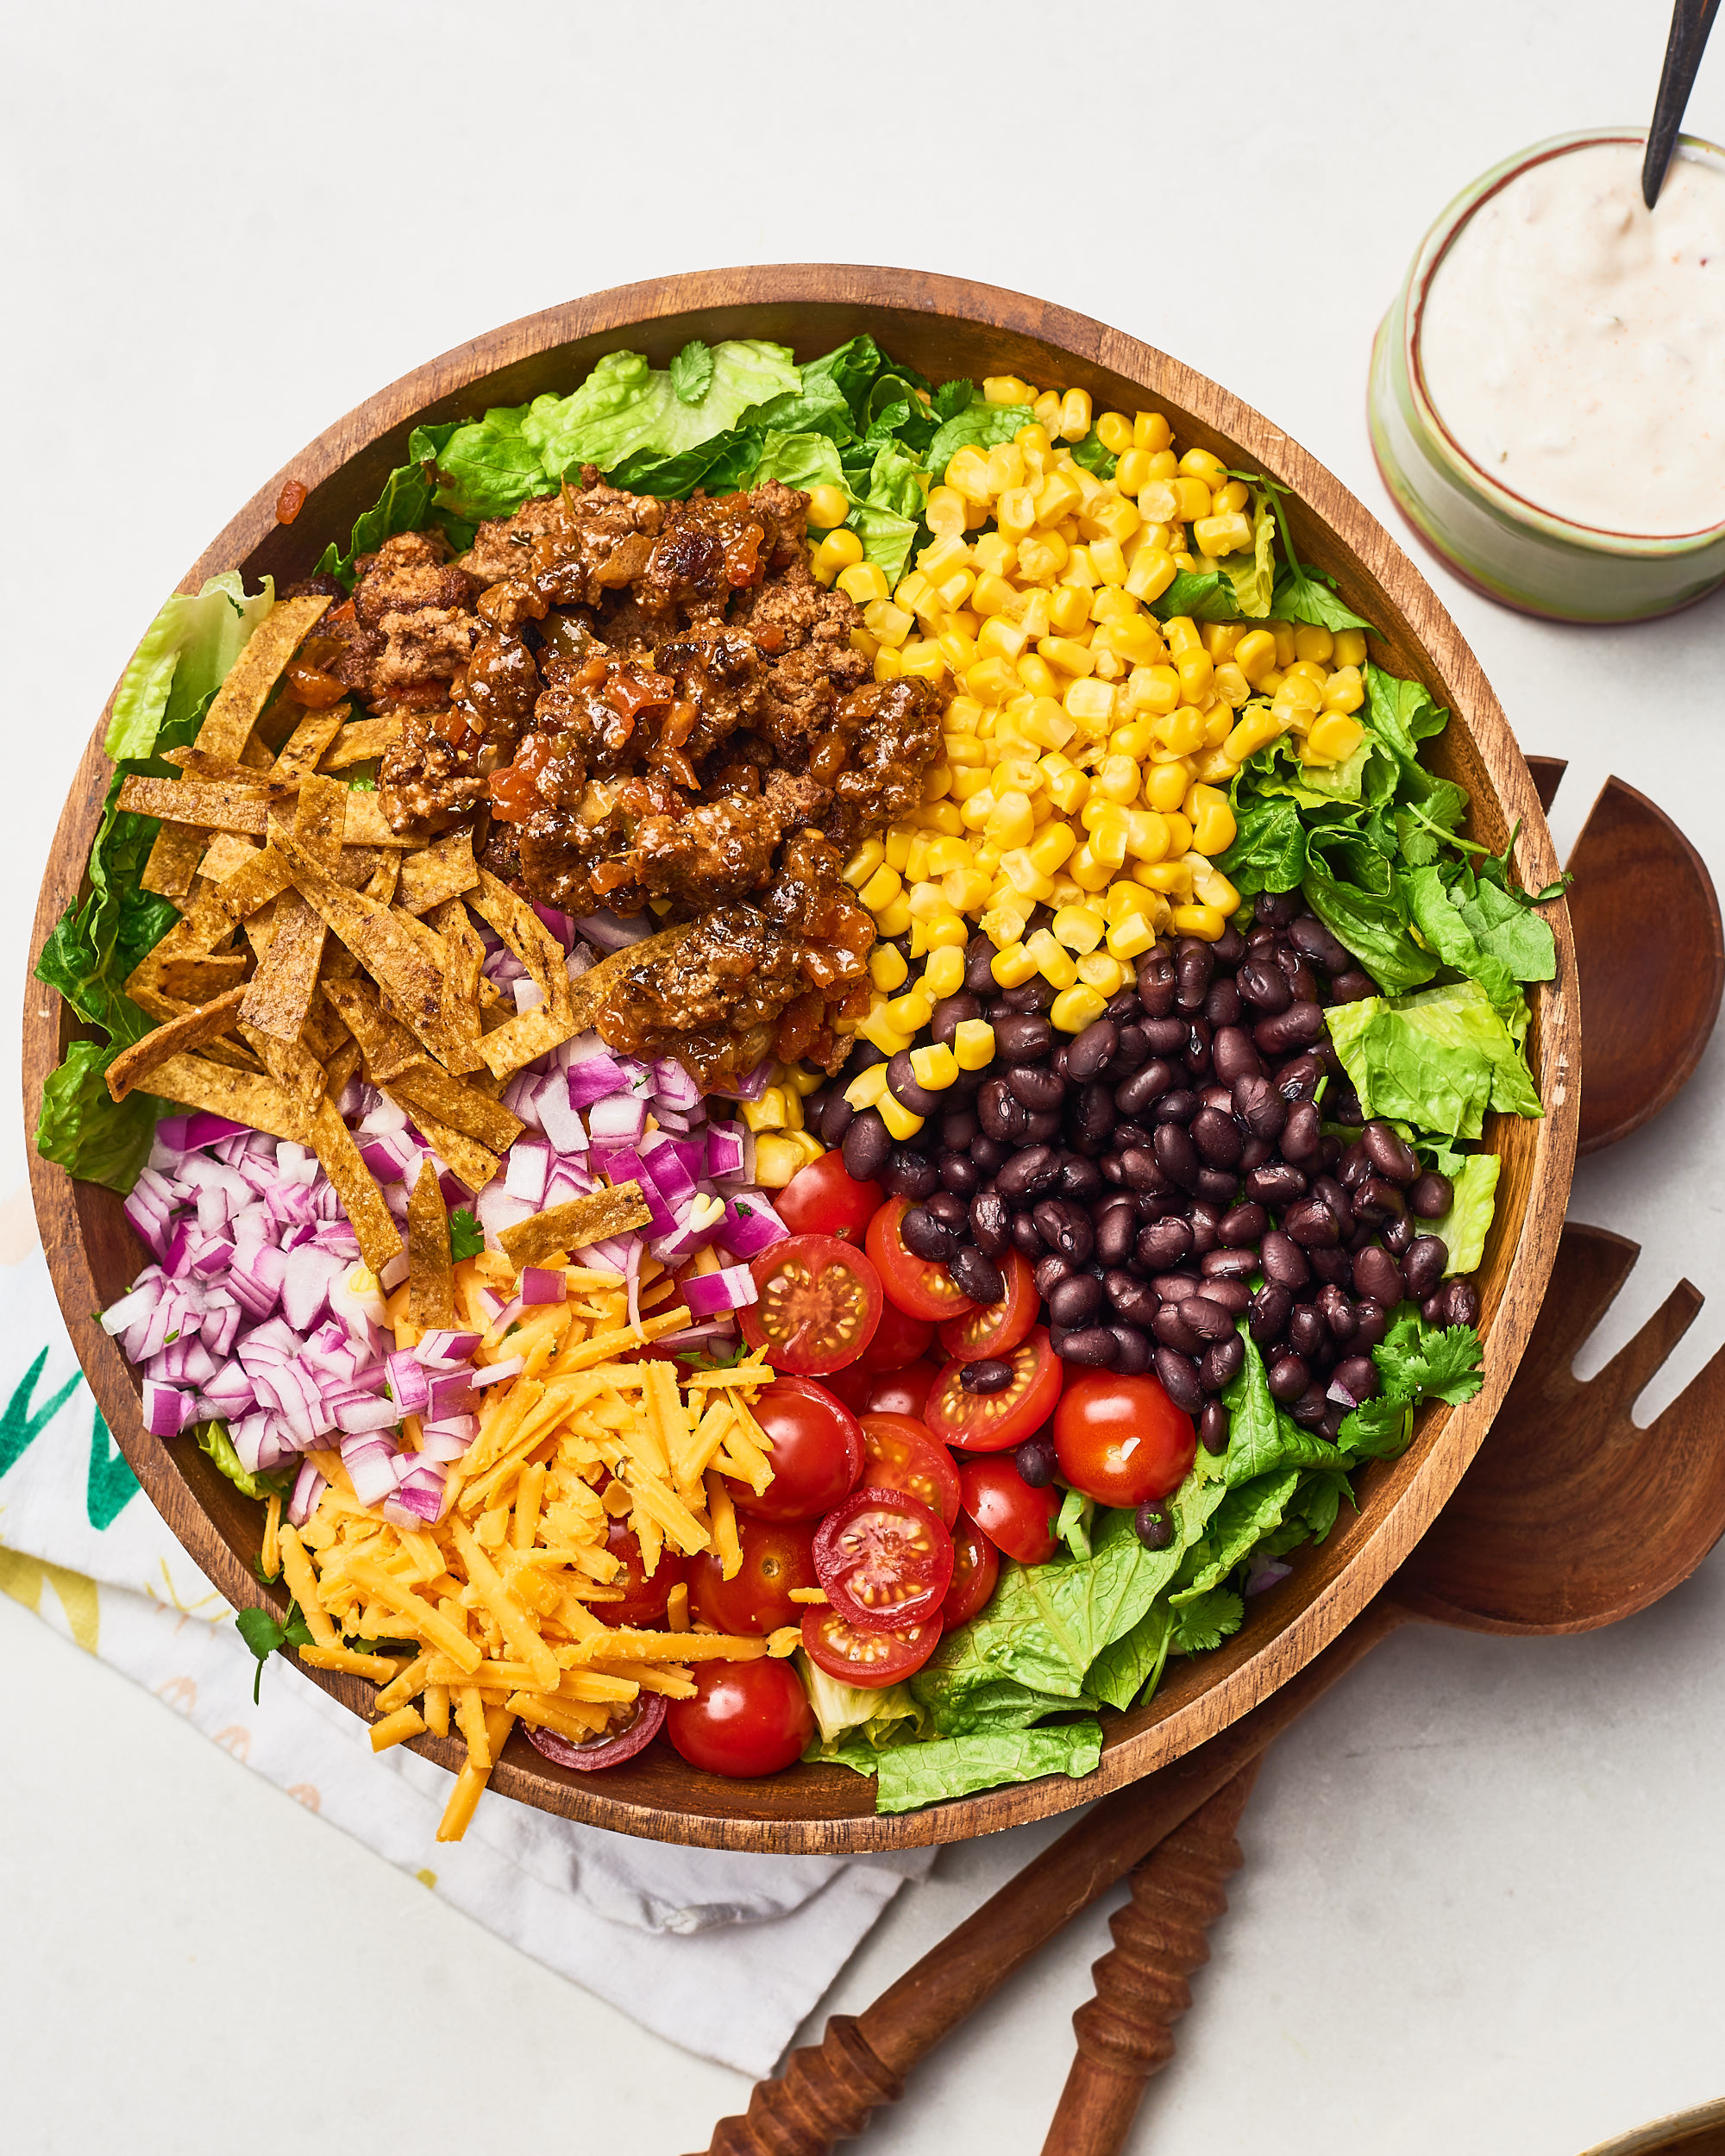 How to Make Ultimate Taco Salad Recipes